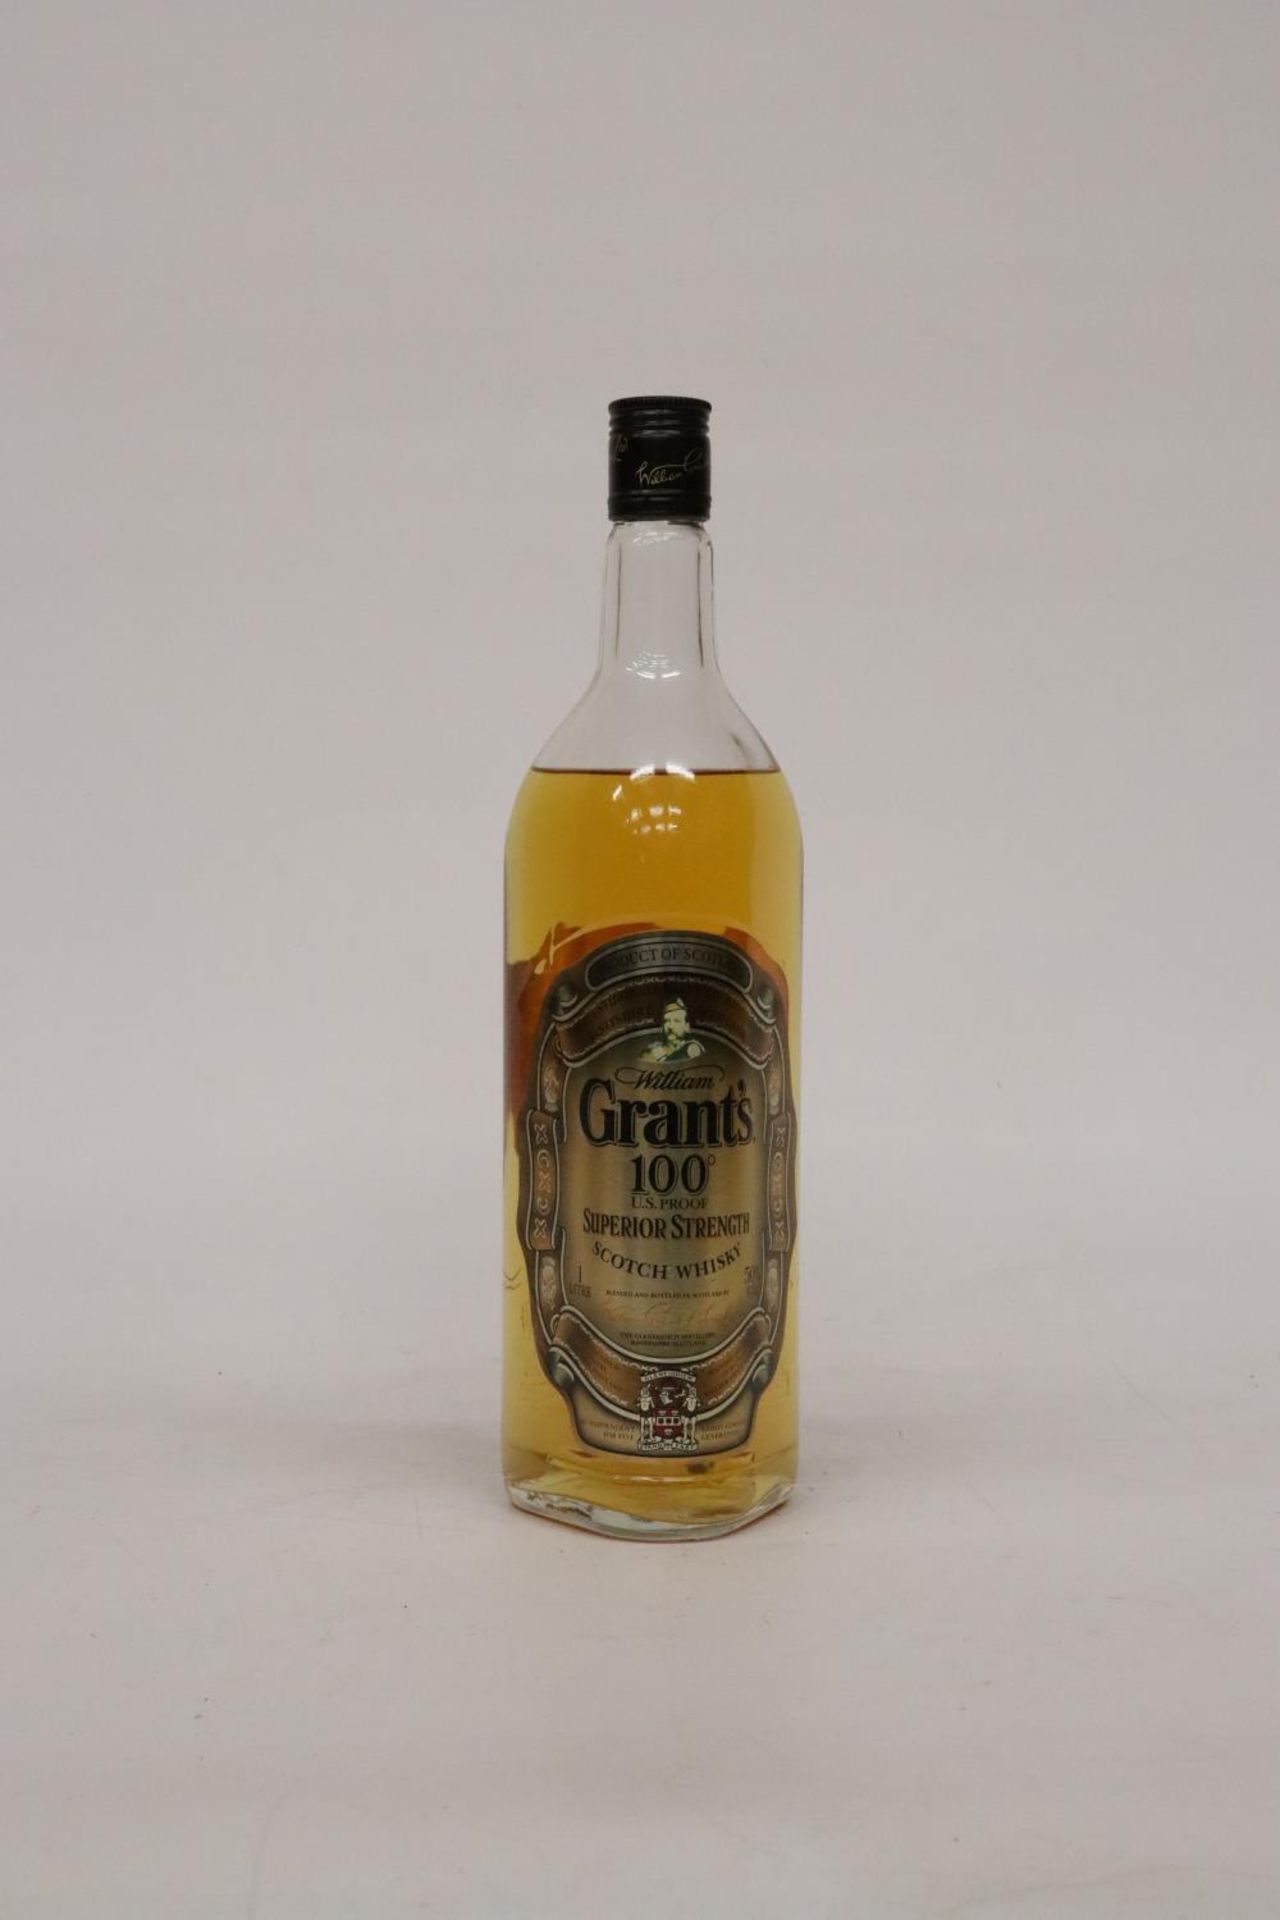 A 1L BOTTLE OF GRANTS 100 PROOF SUPERIOR STRENGTH SCOTCH WHISKY - Image 3 of 4